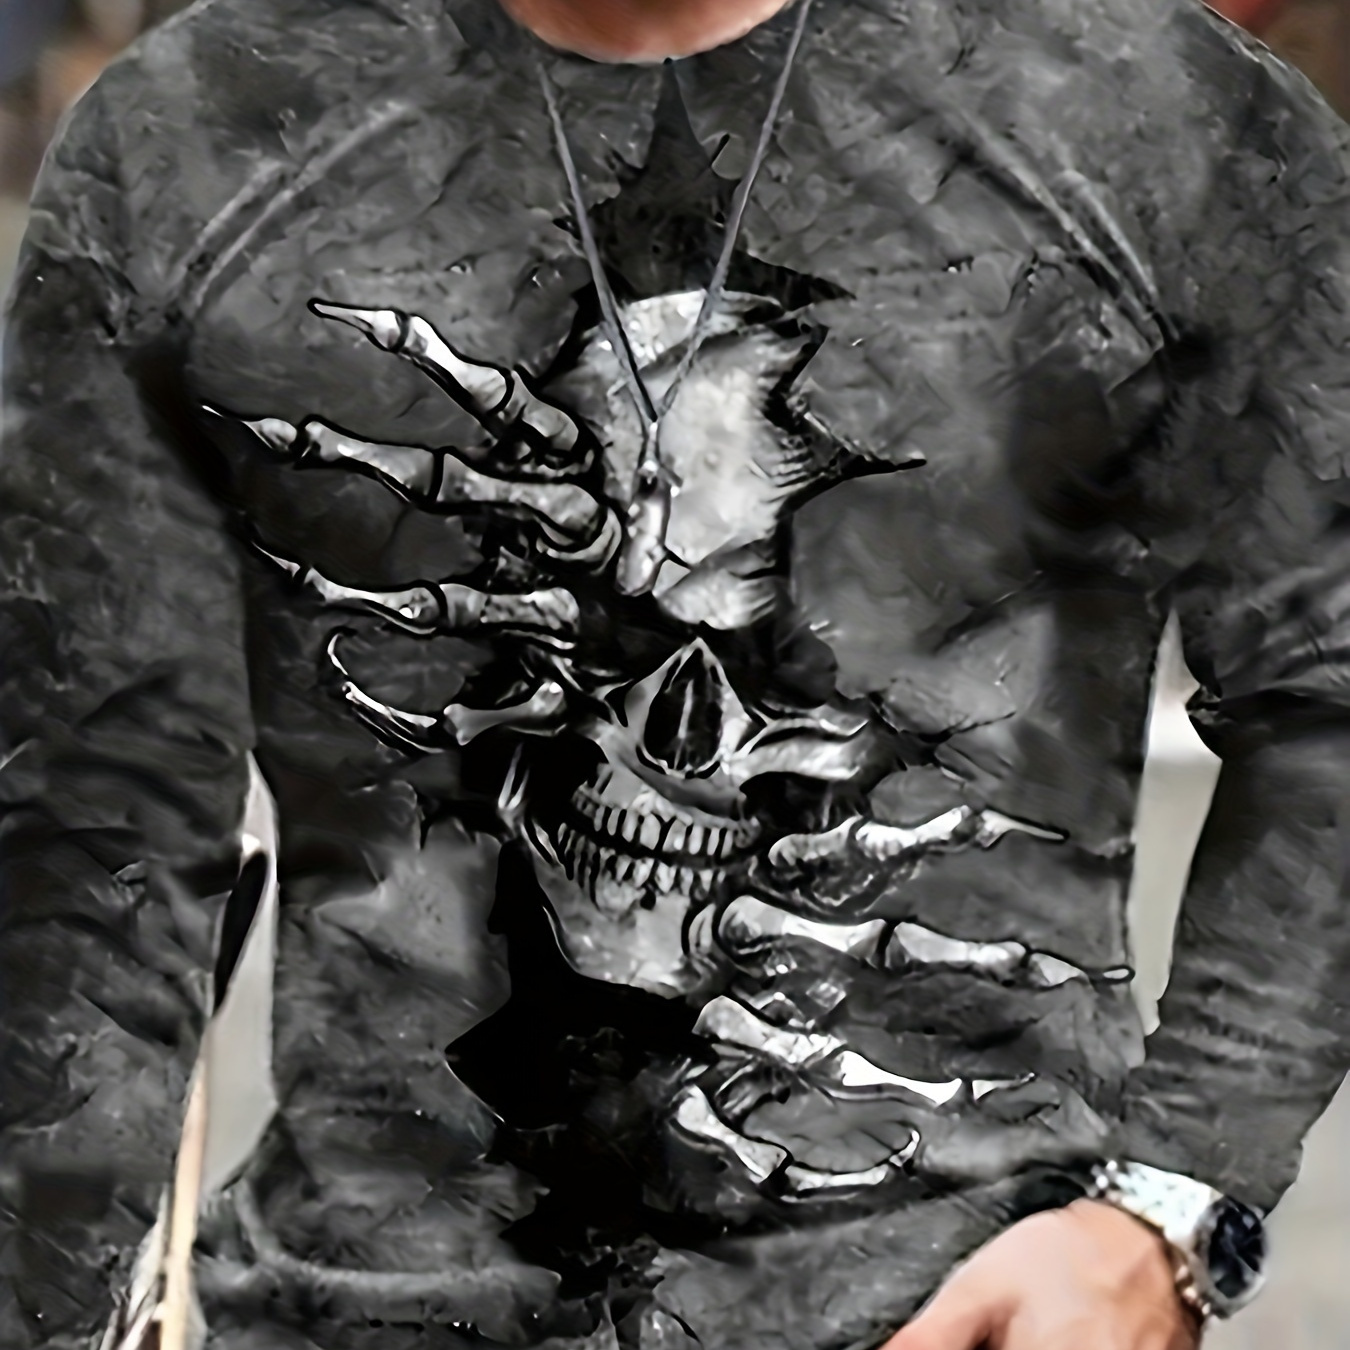 

3d Skeleton Print, Men's Graphic Design Crew Neck Long Sleeve Active T-shirt Tee, Casual Comfy Shirts For Spring Summer Autumn, Men's Clothing Tops